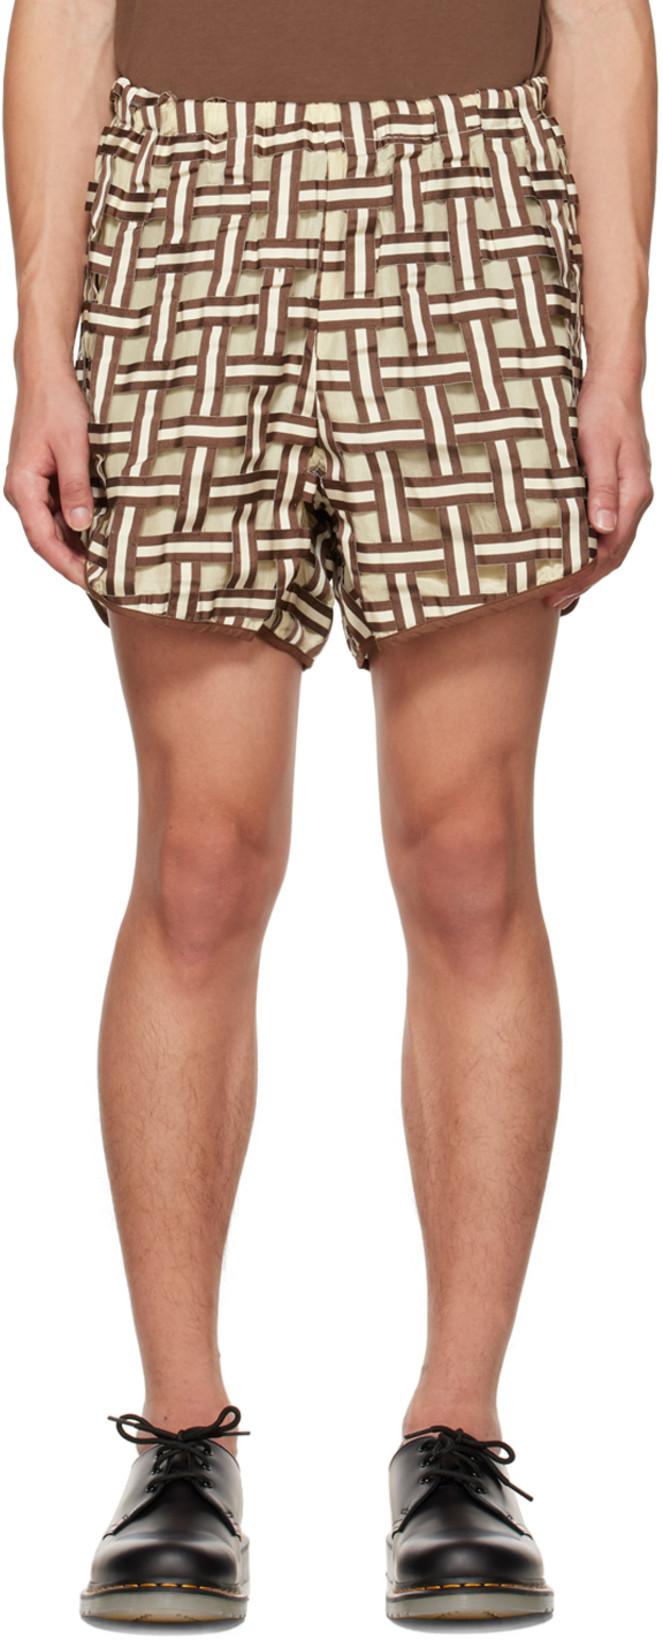 Brown & Beige Checkerboard Shorts by CONNOR MC KNIGHT